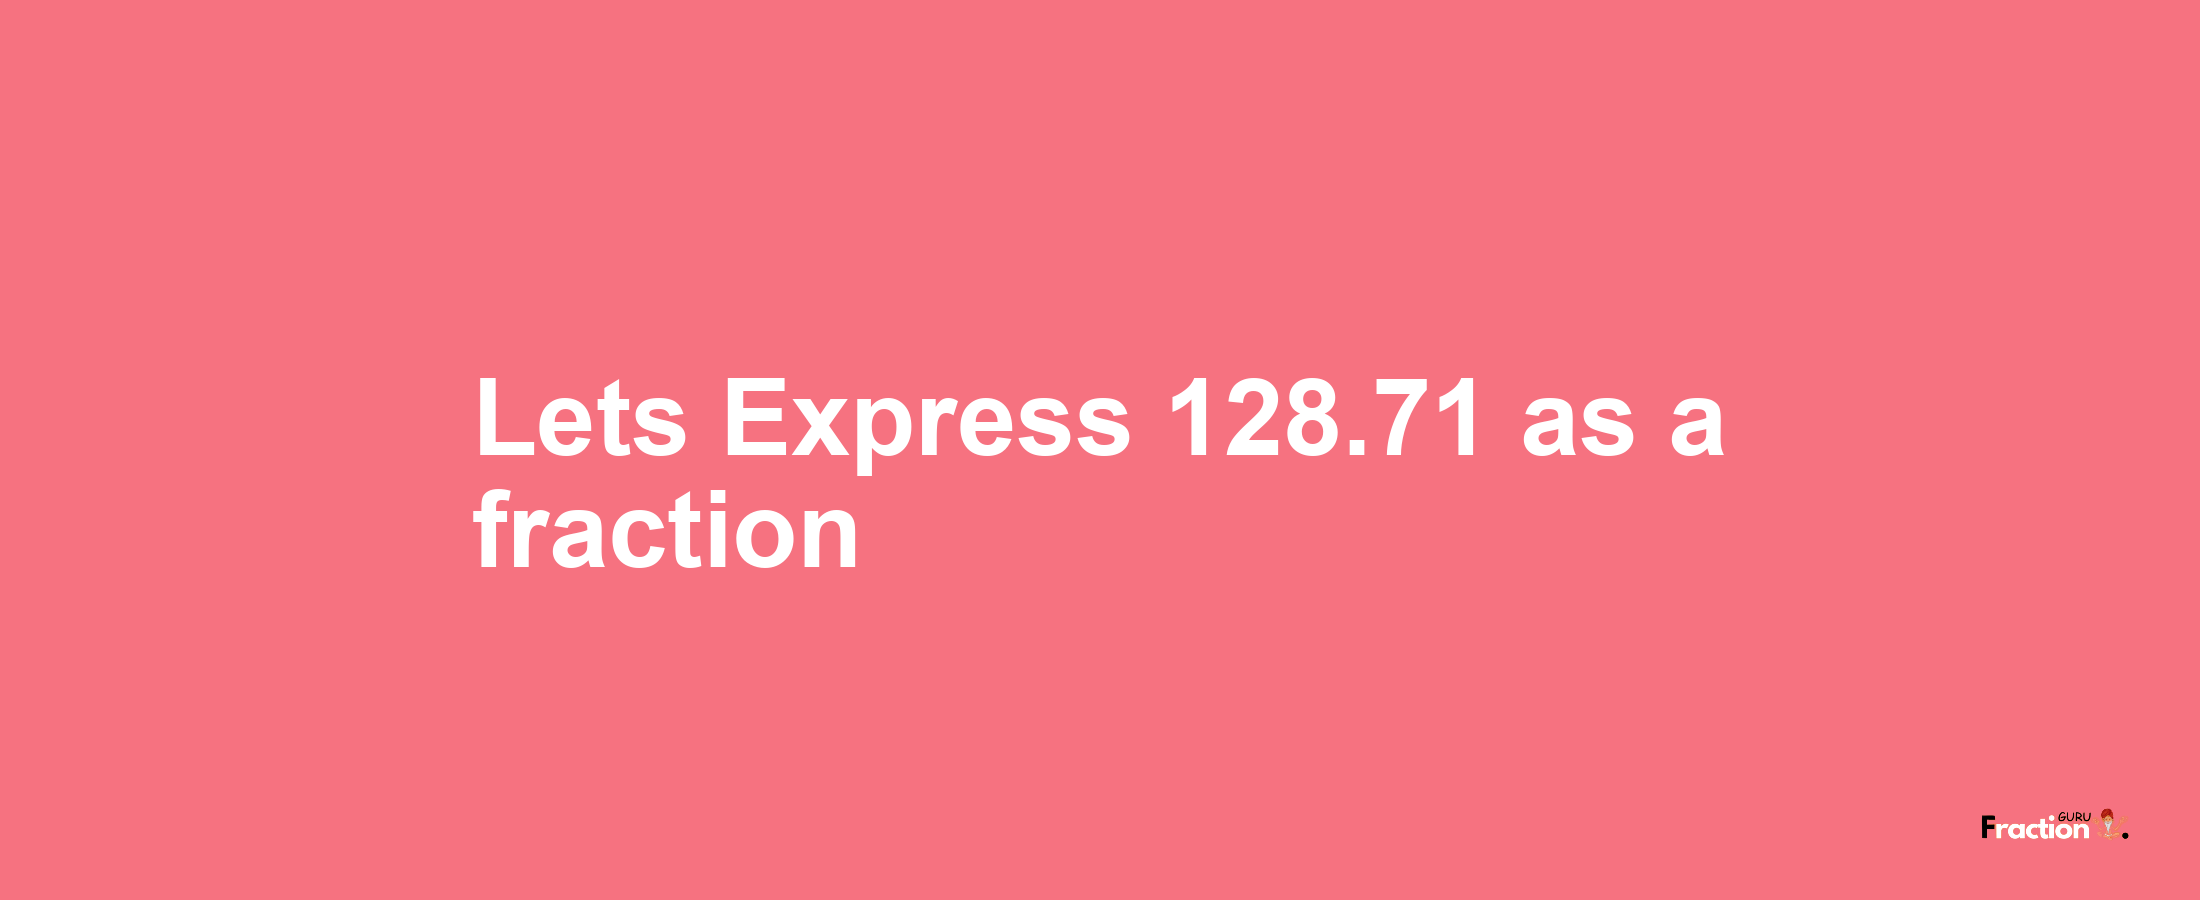 Lets Express 128.71 as afraction